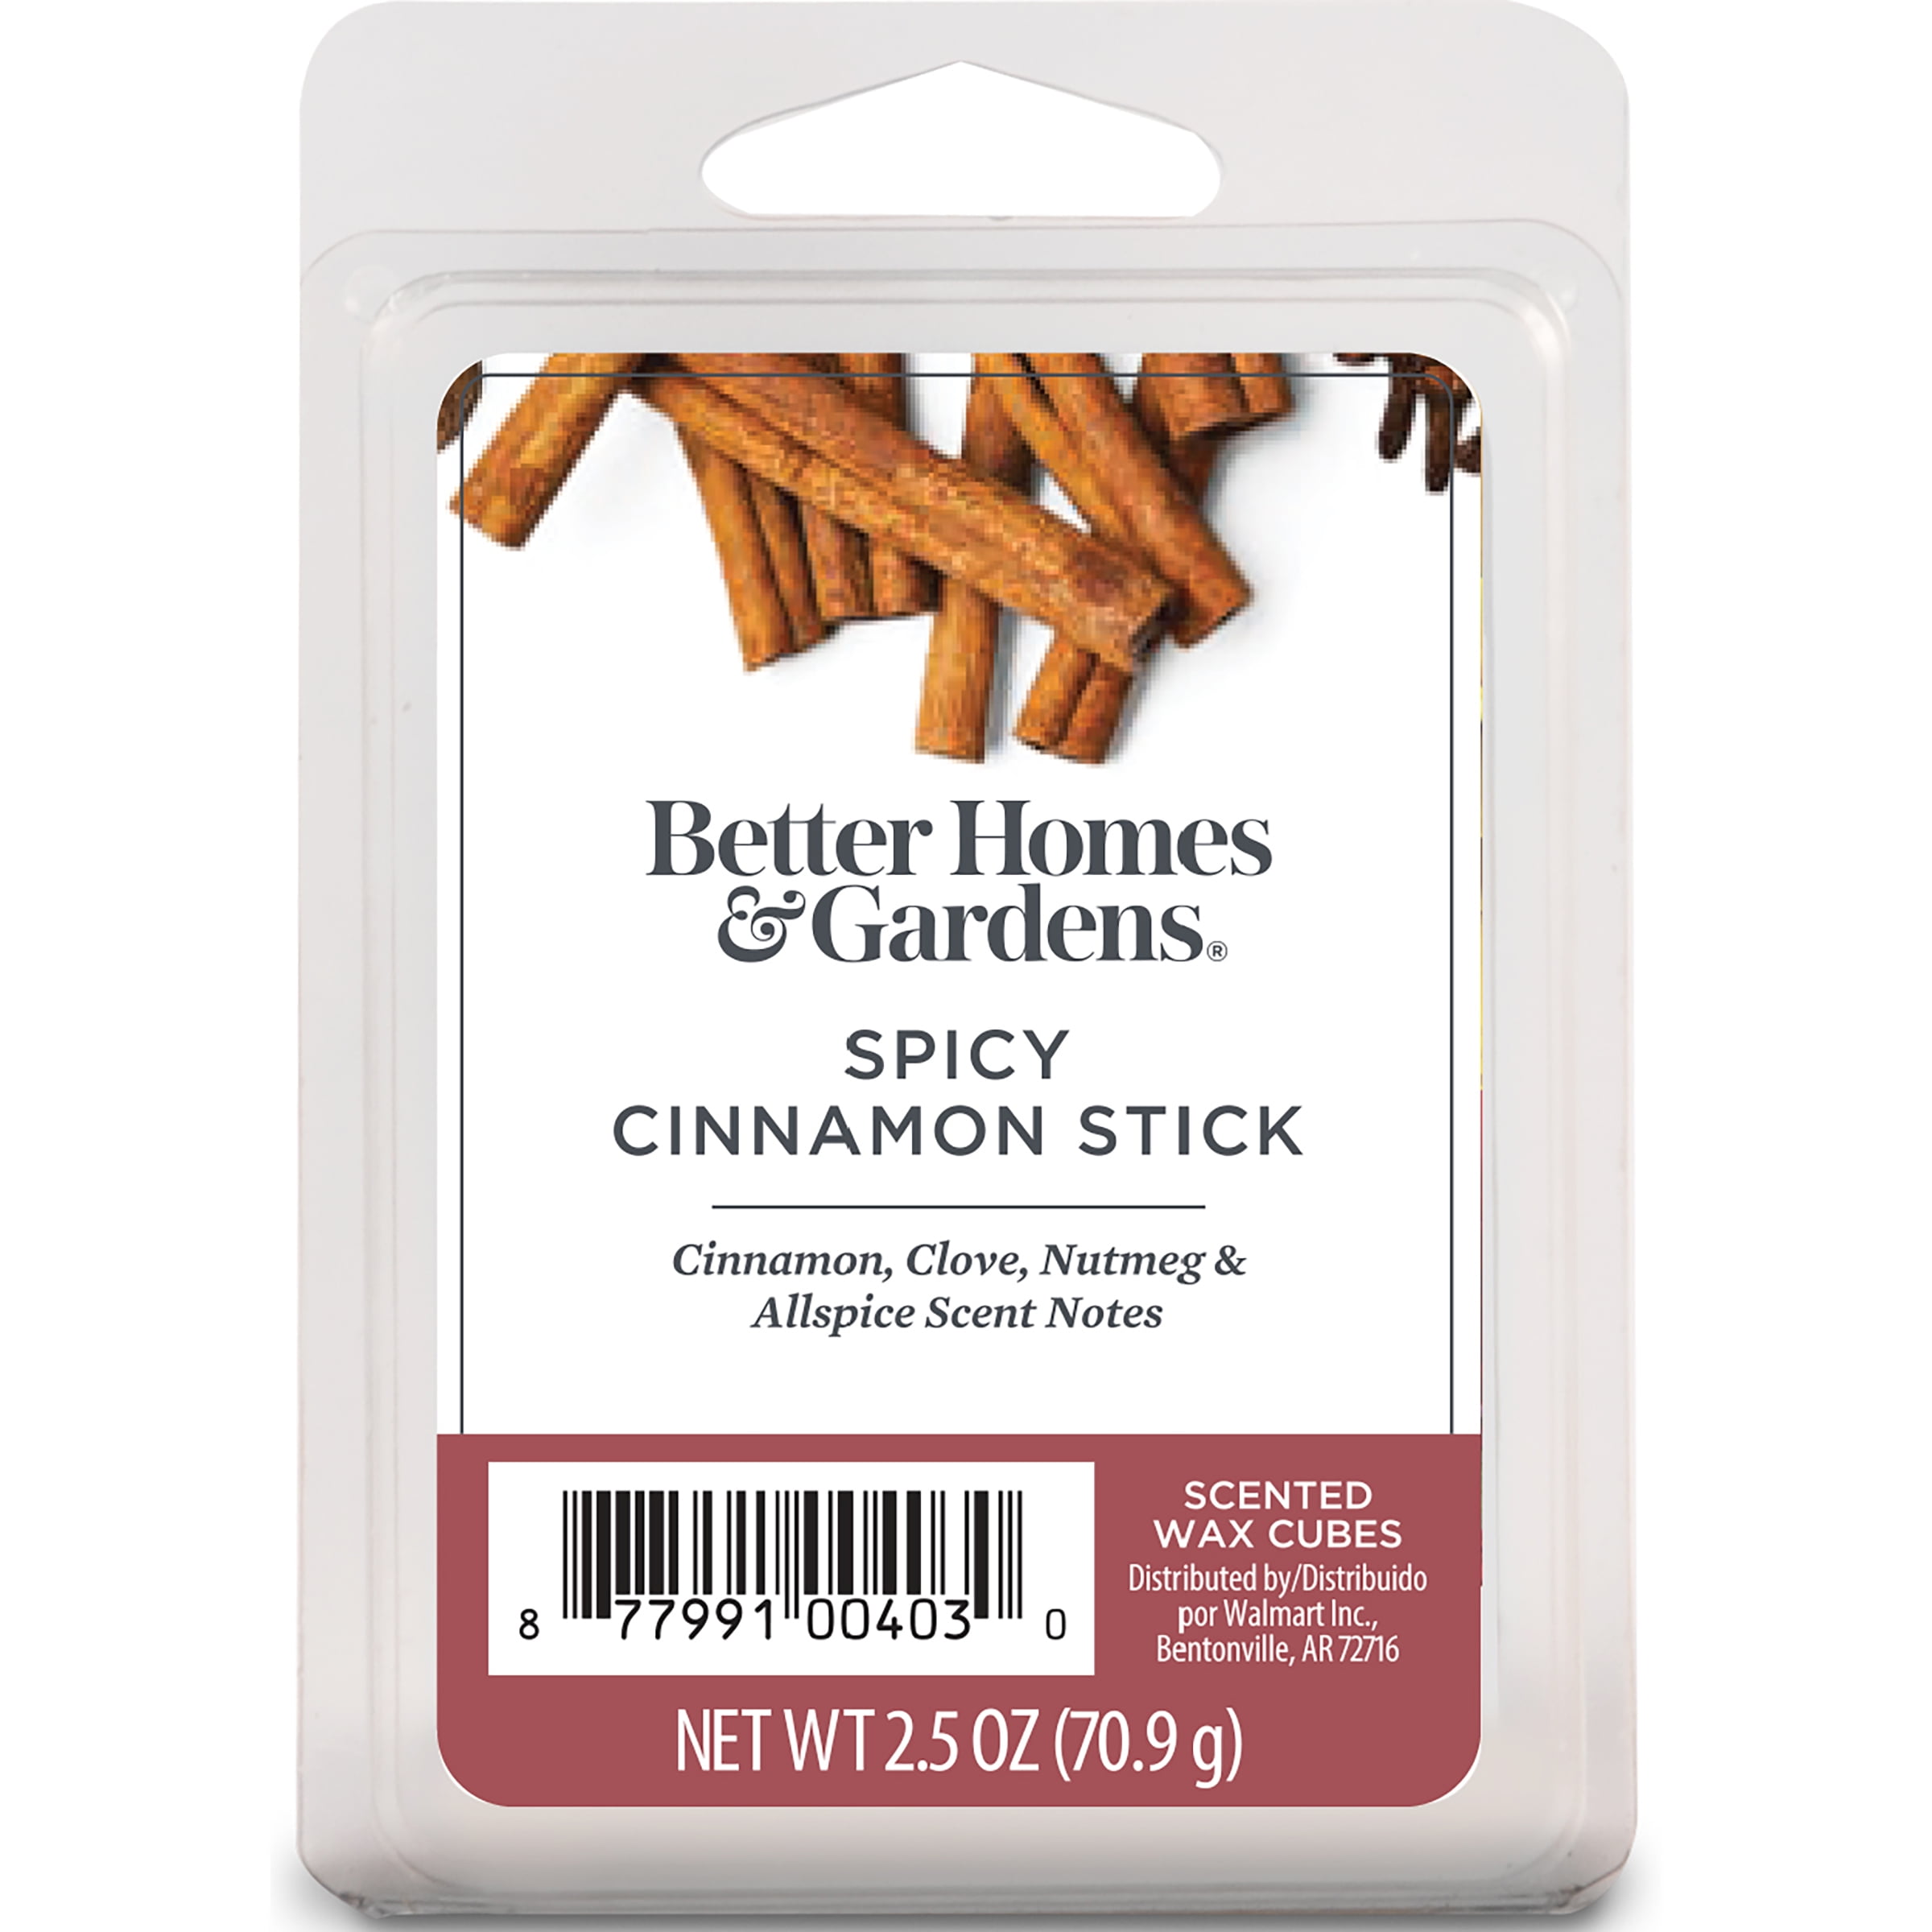 Better Homes and Gardens Spicy Cinnamon Stick Scented Wax Cubes